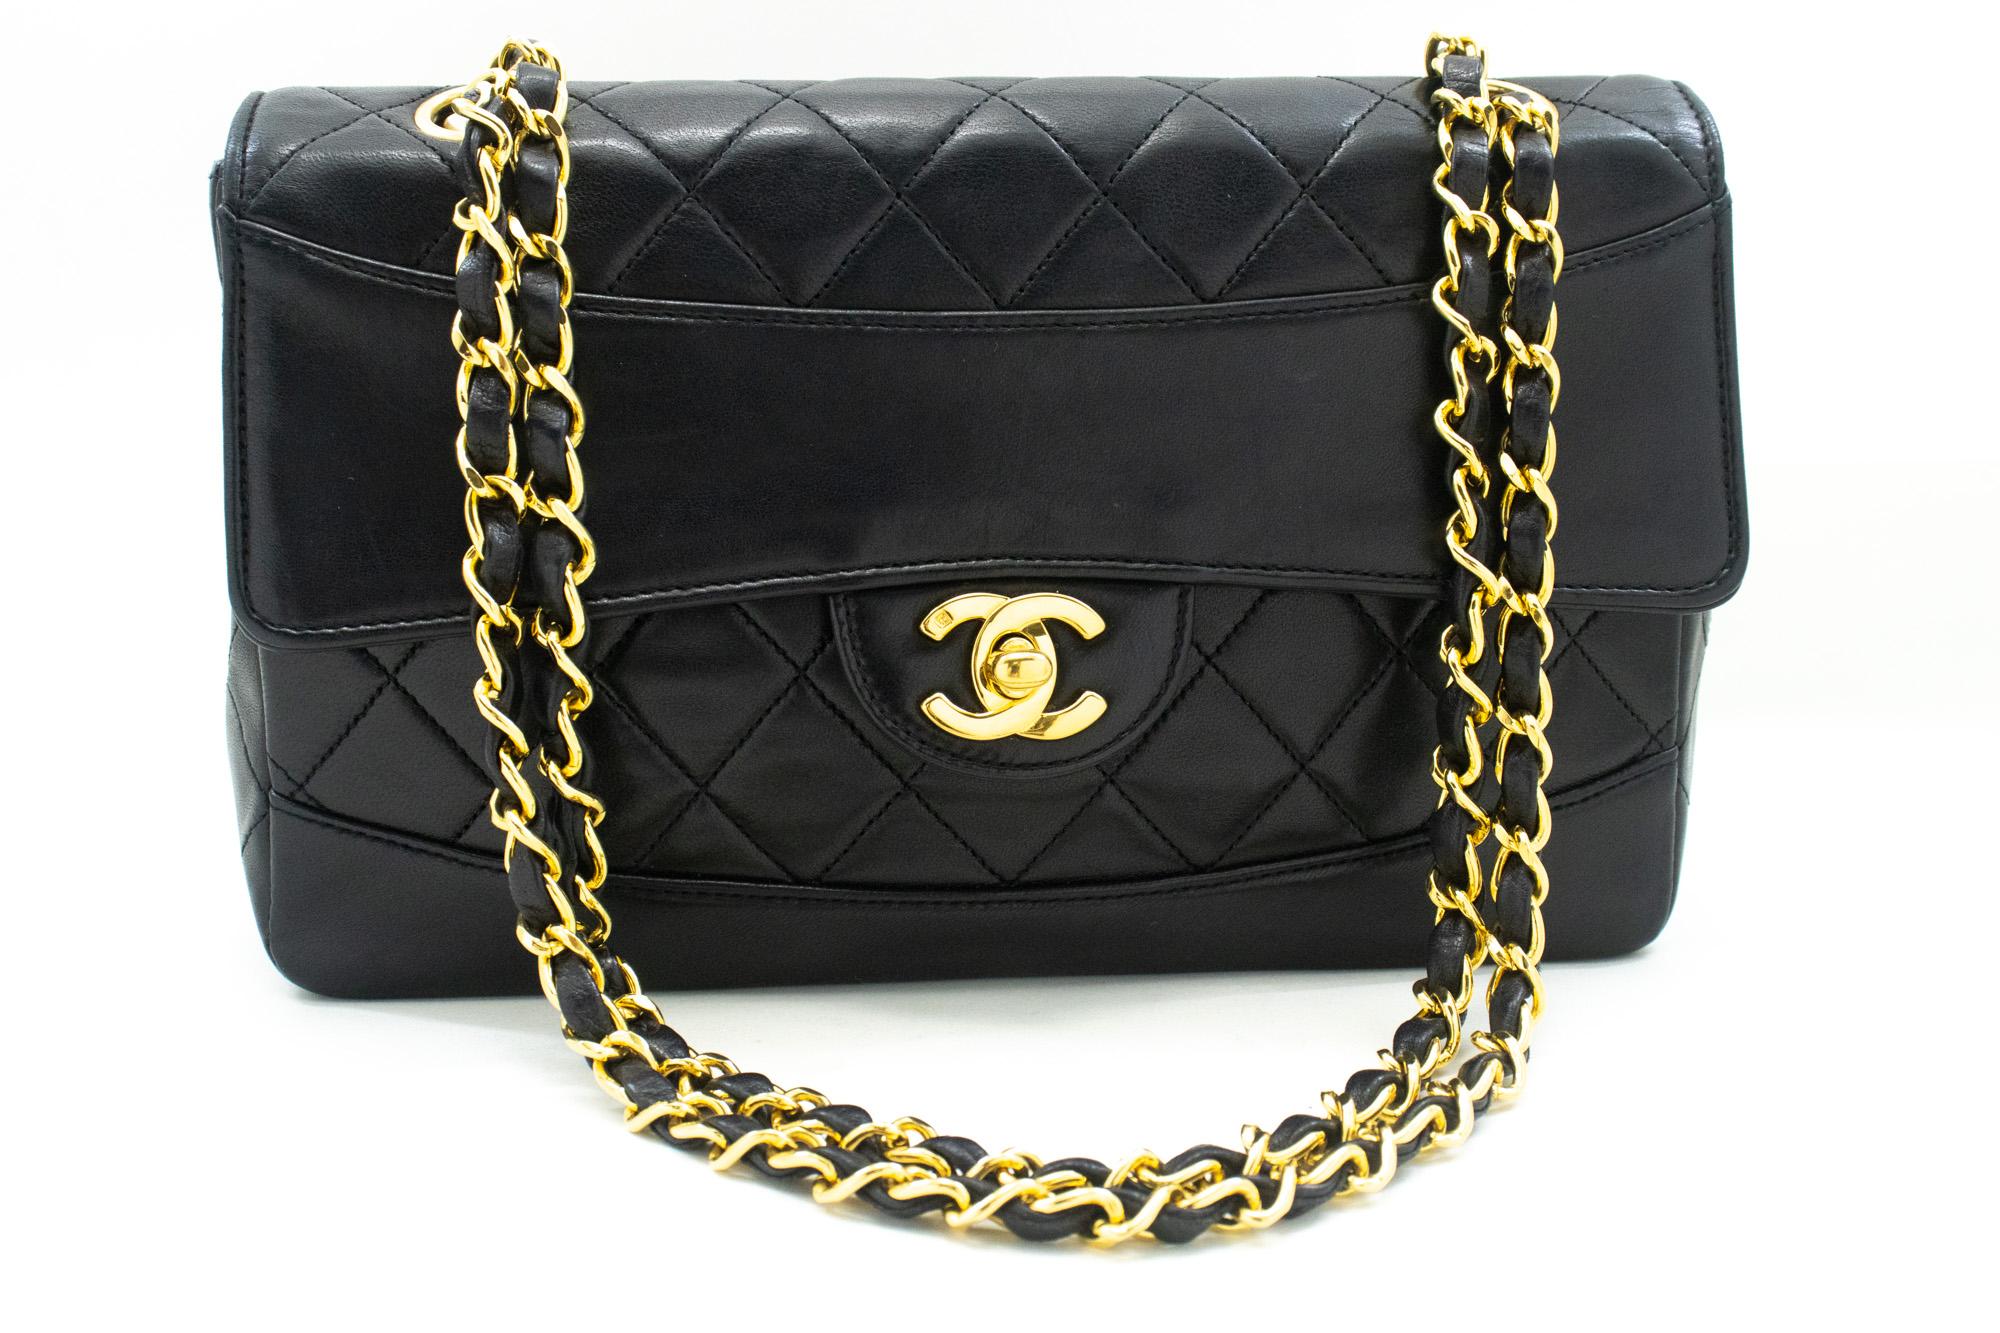 An authentic CHANEL Vintage Classic Chain Shoulder Bag Single Flap Quilted Lamb. The color is Black. The outside material is Leather. The pattern is Solid. This item is Vintage / Classic. The year of manufacture would be 1989-1991.
Conditions &